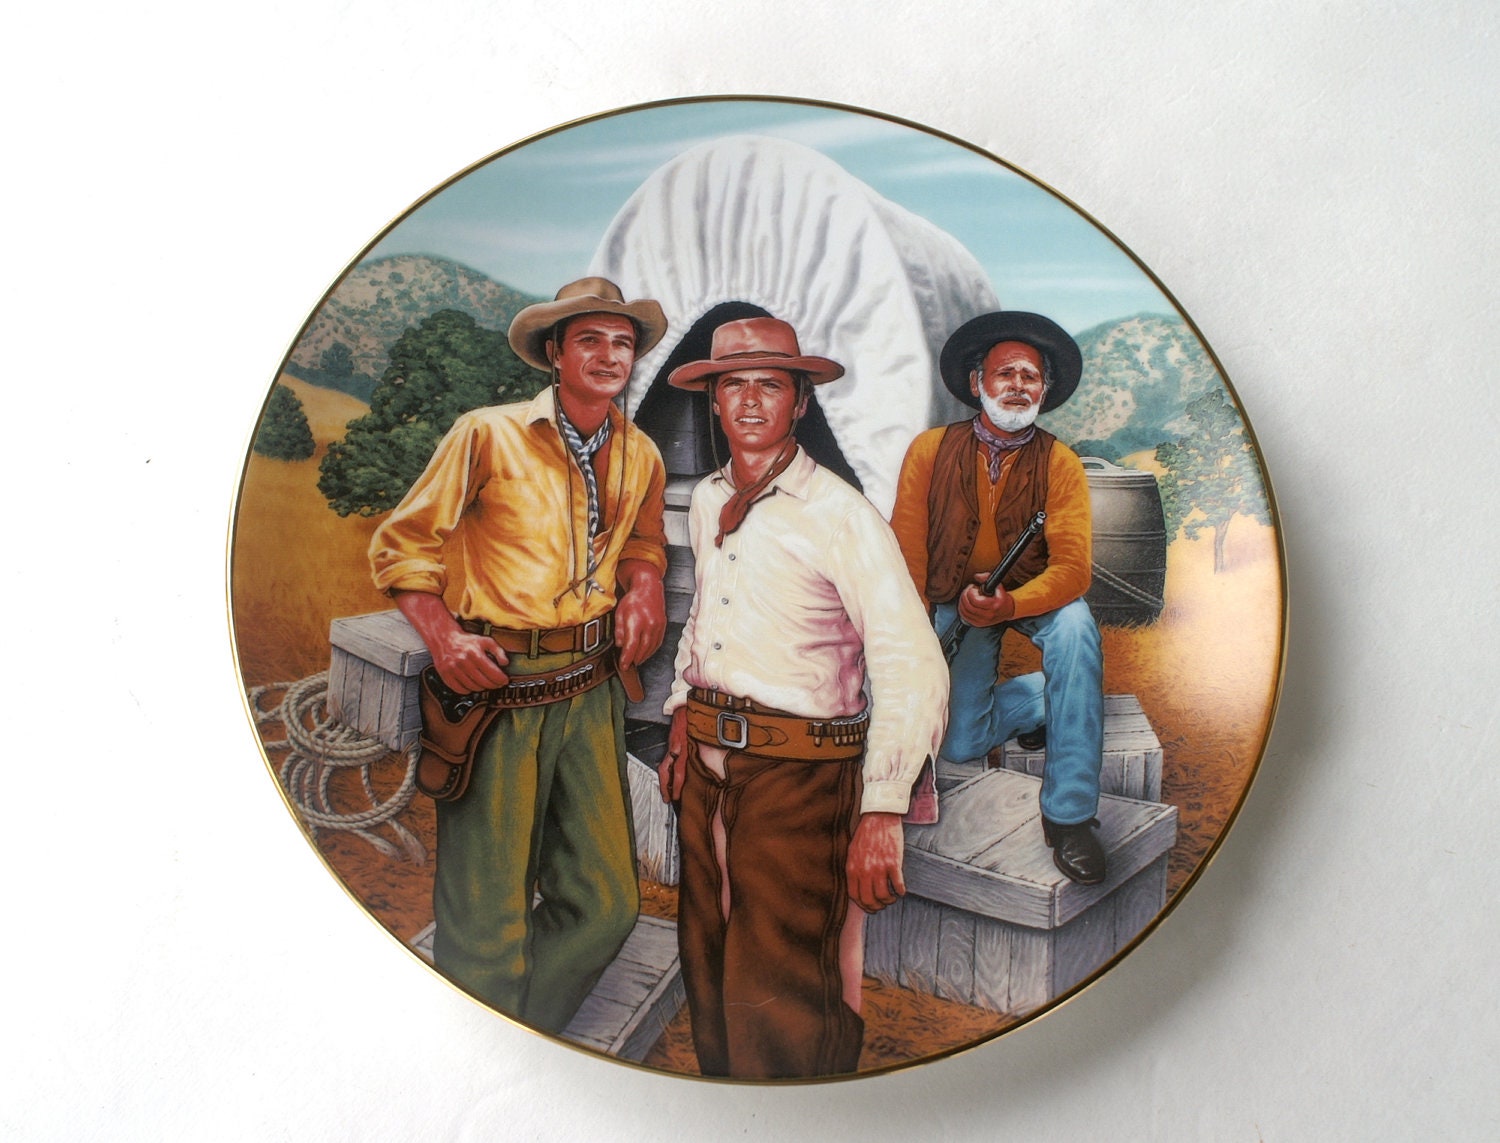 Rawhide Clint Eastwood Collectible Porcelain Plate Limited Edition - RinnovatoVintage